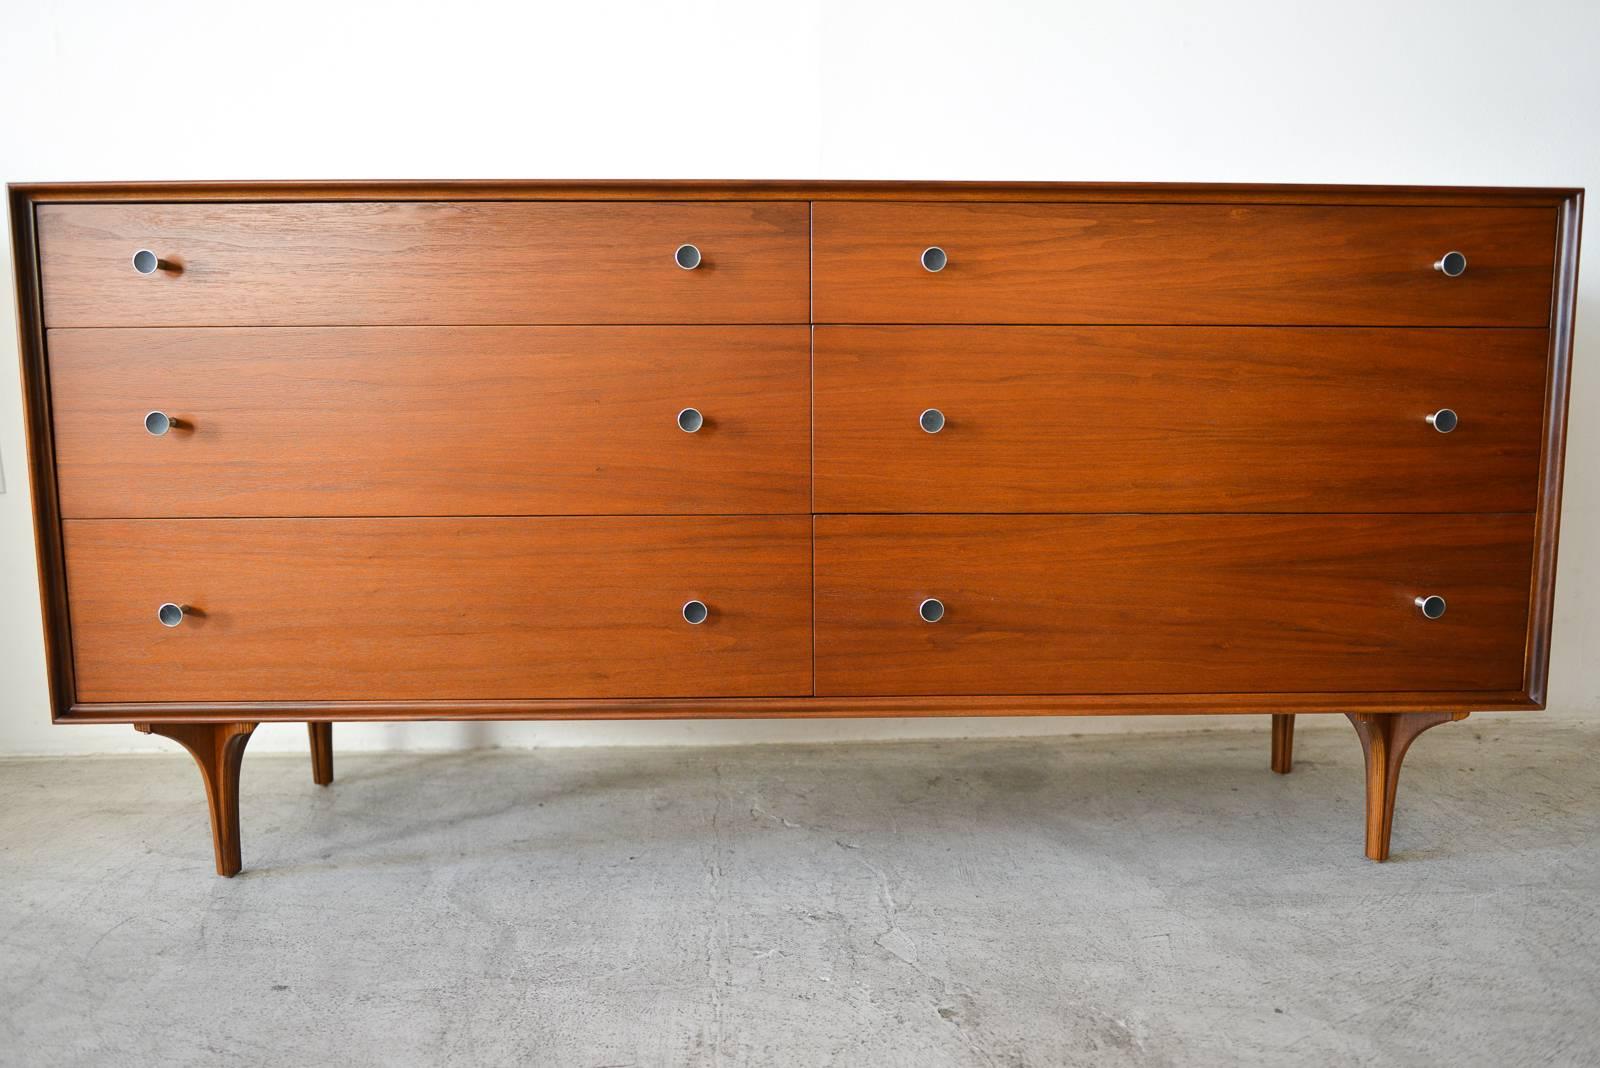 Robert Baron for Glenn of California six-drawer dresser or credenza, circa 1965. Professionally restored in showroom condition. Original hardware. Beautiful walnut grain.

Can be seen in our showroom at MODERN VAULT, 361 Old Newport Blvd, Newport